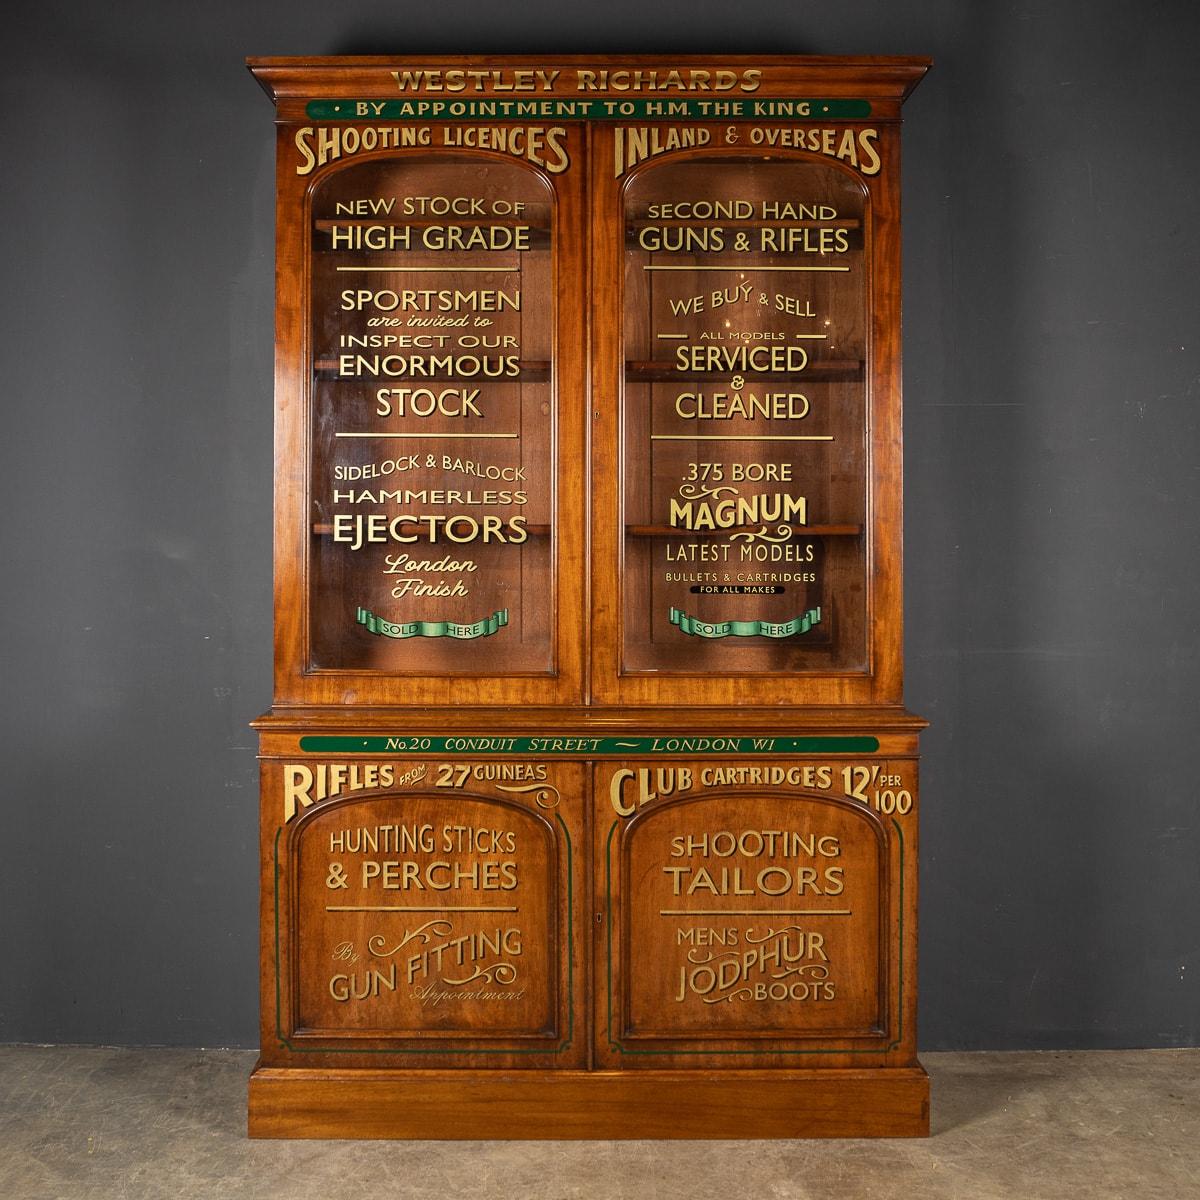 Antique late 19th Century Victorian mahogany glass fronted display cabinet, later painted for use in a gentleman's gun shop based in London. This stunning piece of British craftesmanship has been beautifully later painted with gold lettering on